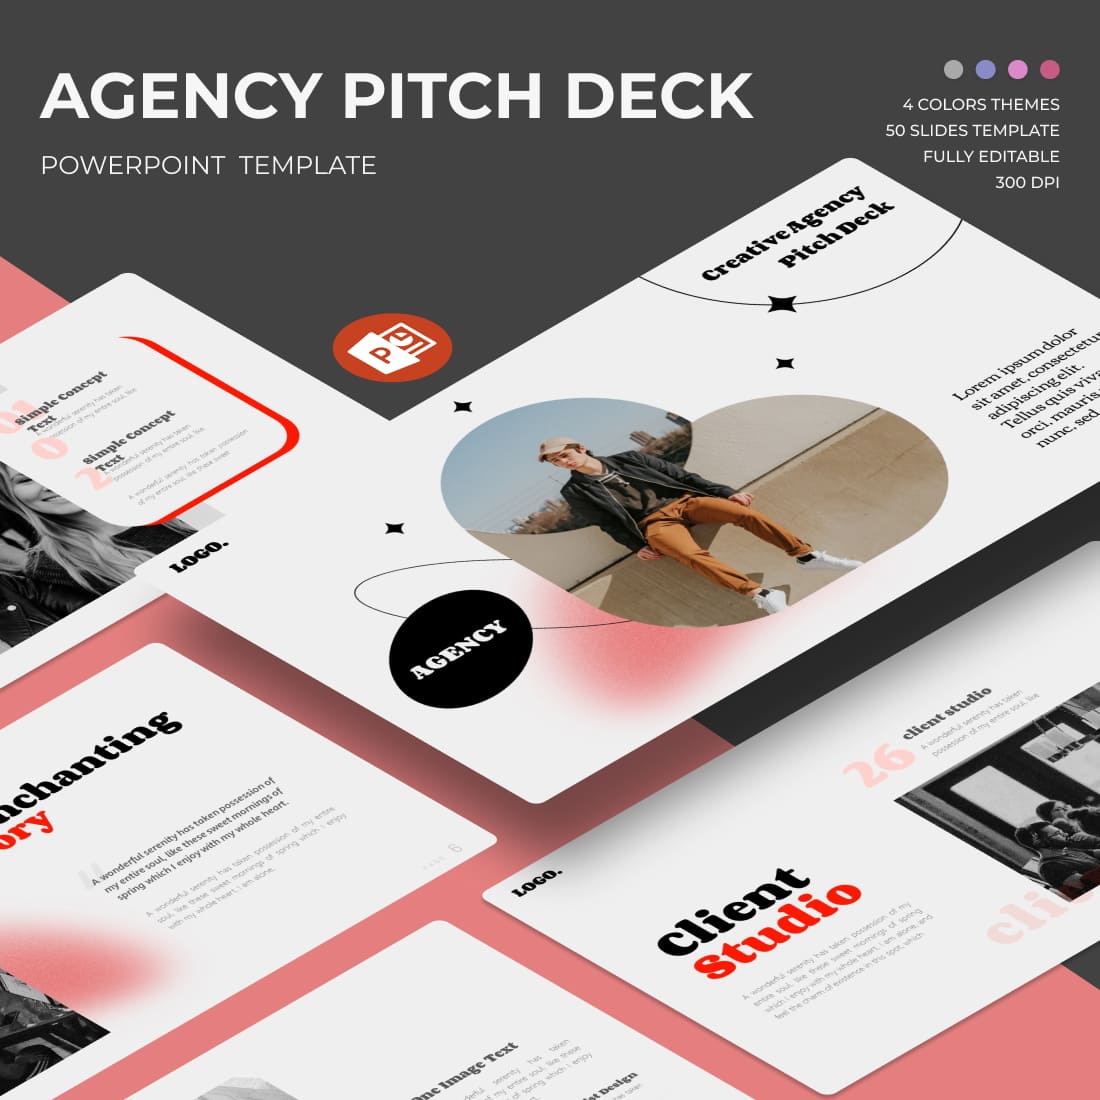 Agency Pitch Deck Powerpoint Template.